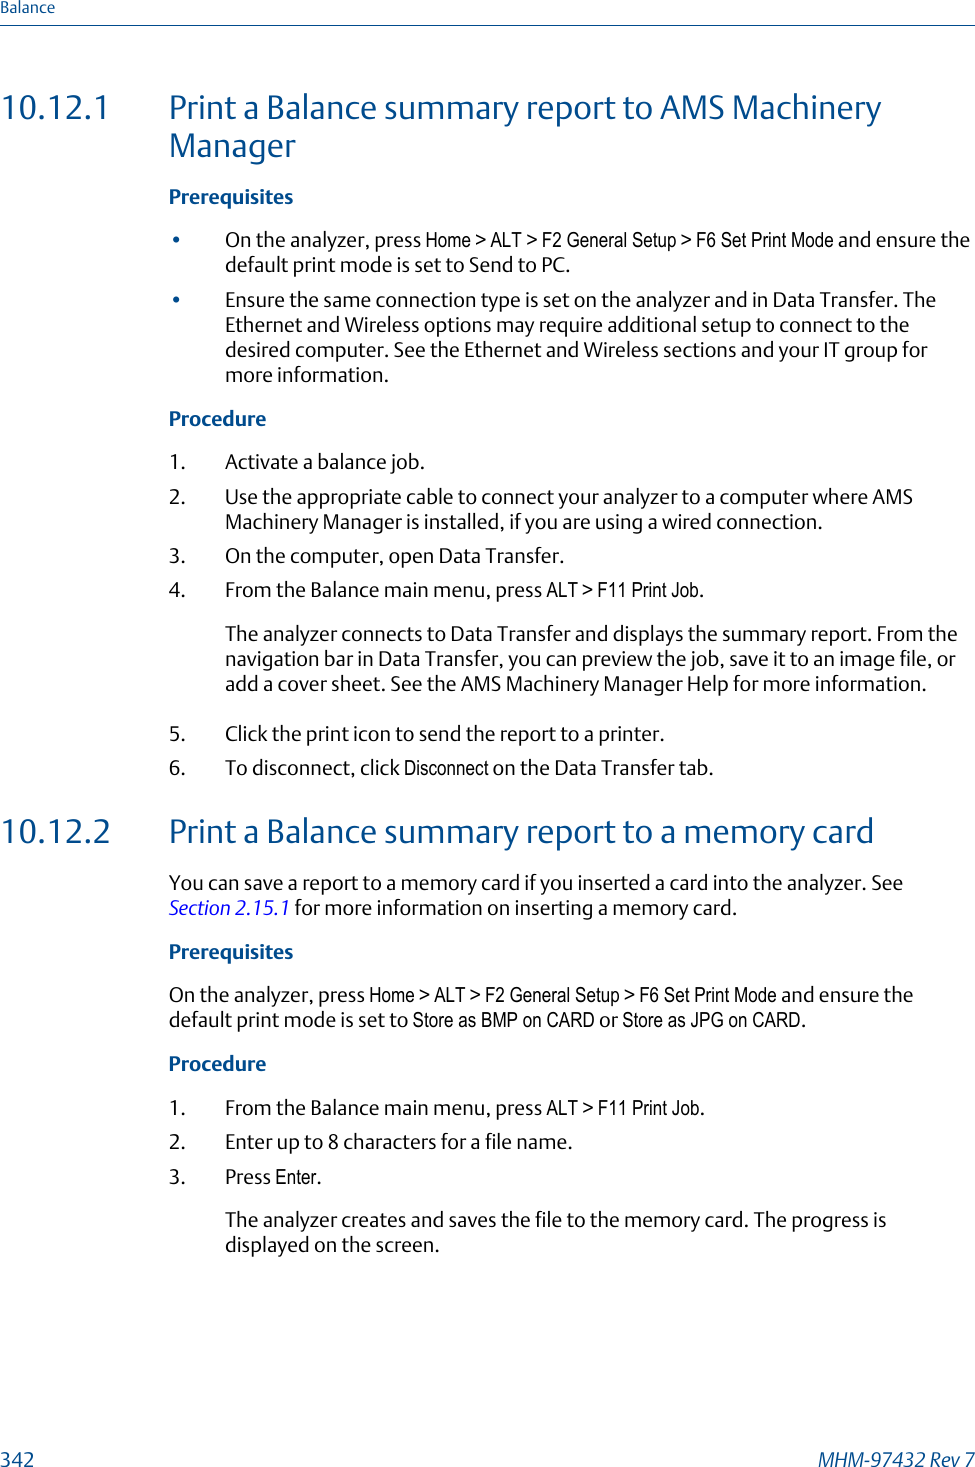 10.12.1 Print a Balance summary report to AMS MachineryManagerPrerequisites•On the analyzer, press Home &gt; ALT &gt; F2 General Setup &gt; F6 Set Print Mode and ensure thedefault print mode is set to Send to PC.•Ensure the same connection type is set on the analyzer and in Data Transfer. TheEthernet and Wireless options may require additional setup to connect to thedesired computer. See the Ethernet and Wireless sections and your IT group formore information.Procedure1. Activate a balance job.2. Use the appropriate cable to connect your analyzer to a computer where AMSMachinery Manager is installed, if you are using a wired connection.3. On the computer, open Data Transfer.4. From the Balance main menu, press ALT &gt; F11 Print Job.The analyzer connects to Data Transfer and displays the summary report. From thenavigation bar in Data Transfer, you can preview the job, save it to an image file, oradd a cover sheet. See the AMS Machinery Manager Help for more information.5. Click the print icon to send the report to a printer.6. To disconnect, click Disconnect on the Data Transfer tab.10.12.2 Print a Balance summary report to a memory cardYou can save a report to a memory card if you inserted a card into the analyzer. See Section 2.15.1 for more information on inserting a memory card.PrerequisitesOn the analyzer, press Home &gt; ALT &gt; F2 General Setup &gt; F6 Set Print Mode and ensure thedefault print mode is set to Store as BMP on CARD or Store as JPG on CARD.Procedure1. From the Balance main menu, press ALT &gt; F11 Print Job.2. Enter up to 8 characters for a file name.3. Press Enter.The analyzer creates and saves the file to the memory card. The progress isdisplayed on the screen.Balance342 MHM-97432 Rev 7